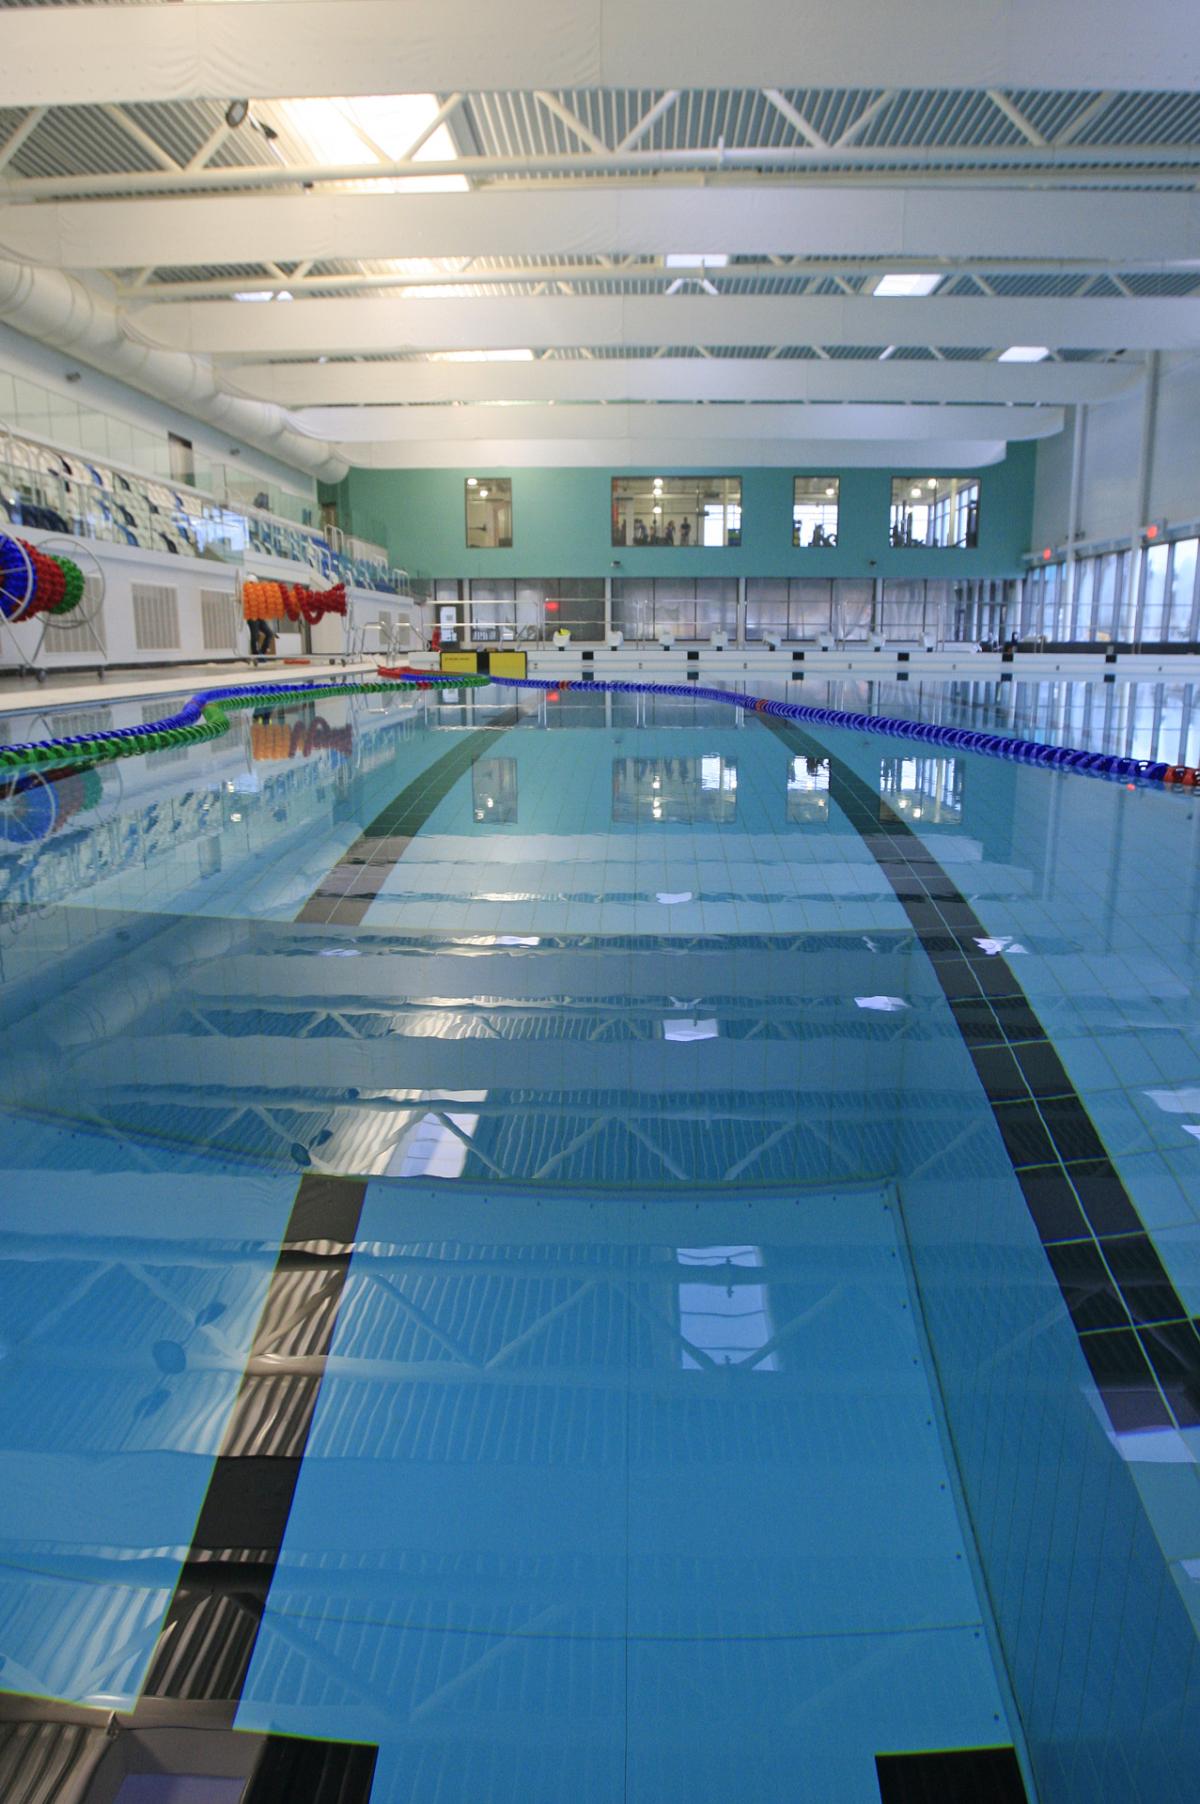 Wycombe Leisure Centre swimming pool - ARM Images